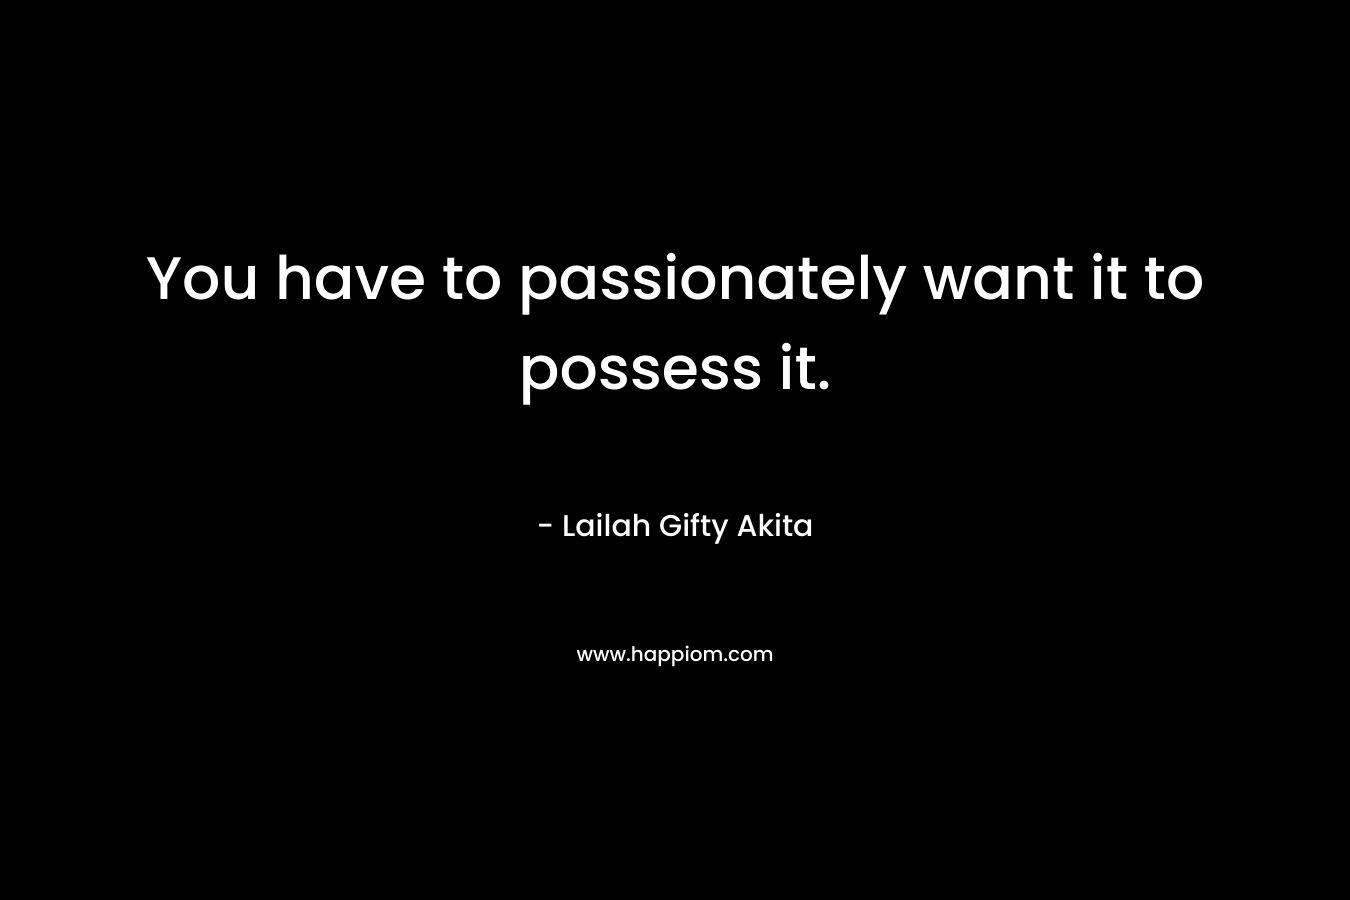 You have to passionately want it to possess it.